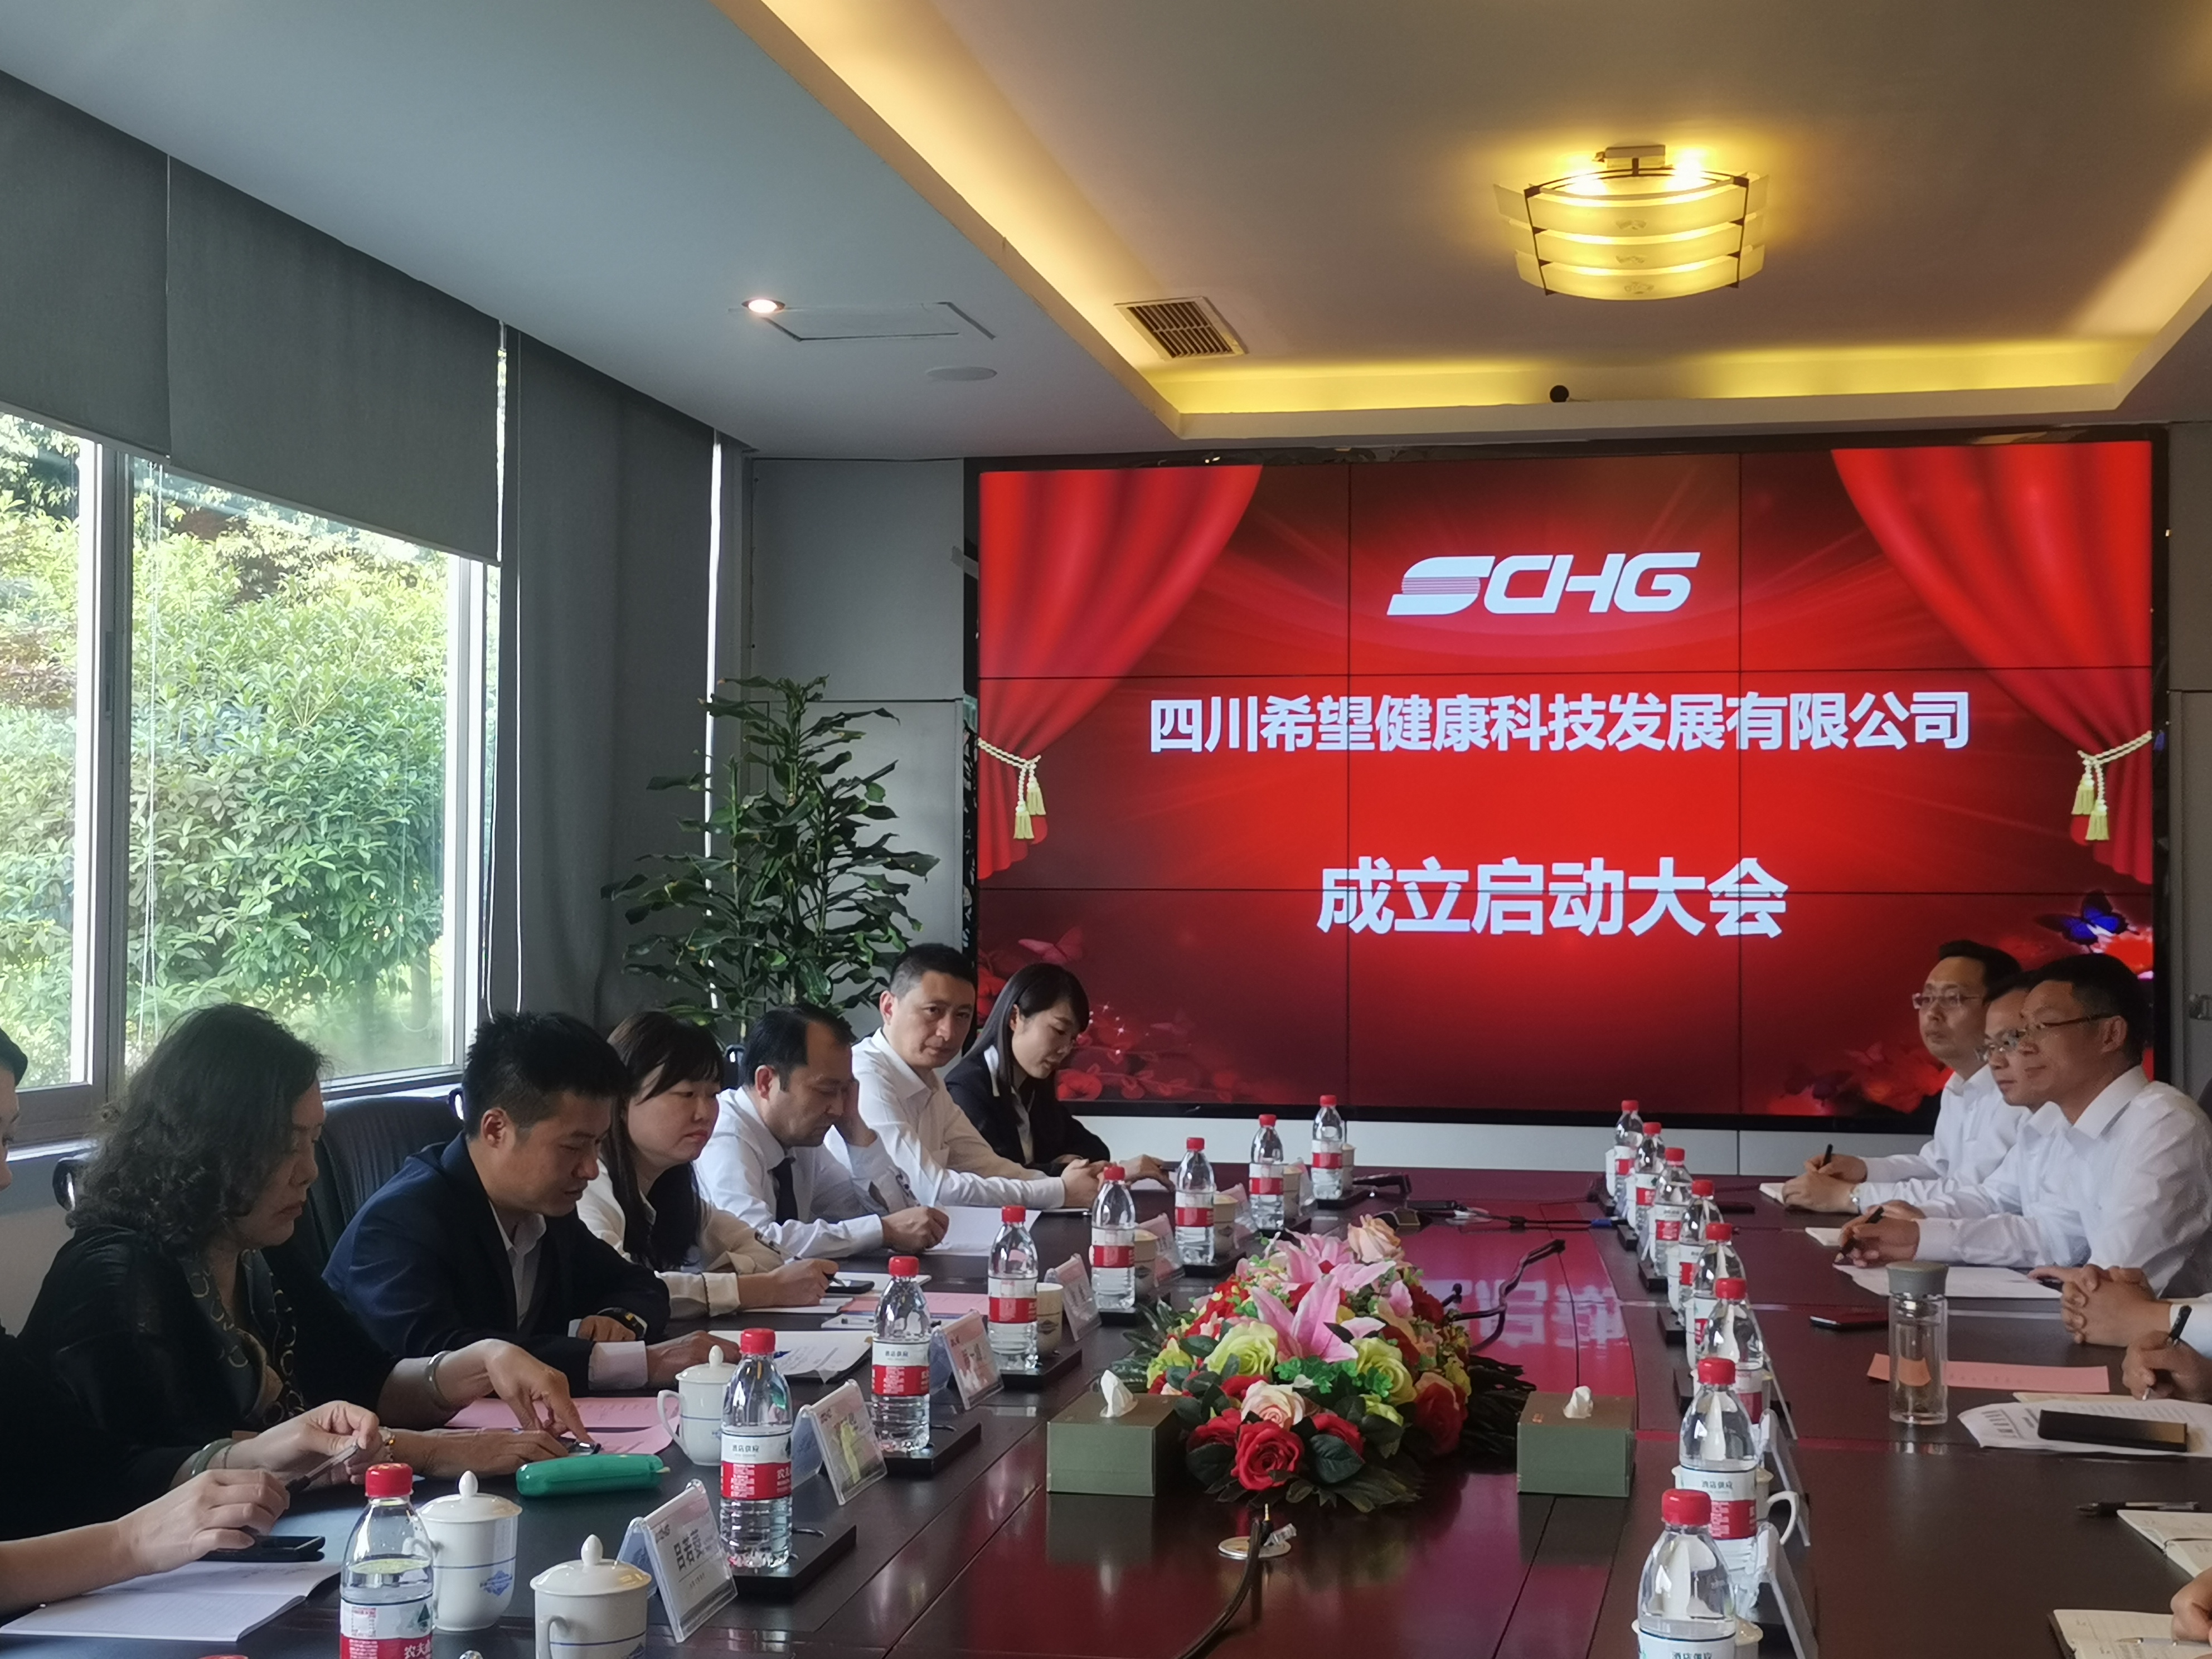 On 8 May, CHG officially established Sichuan Hope Health Technology Development Corp. 